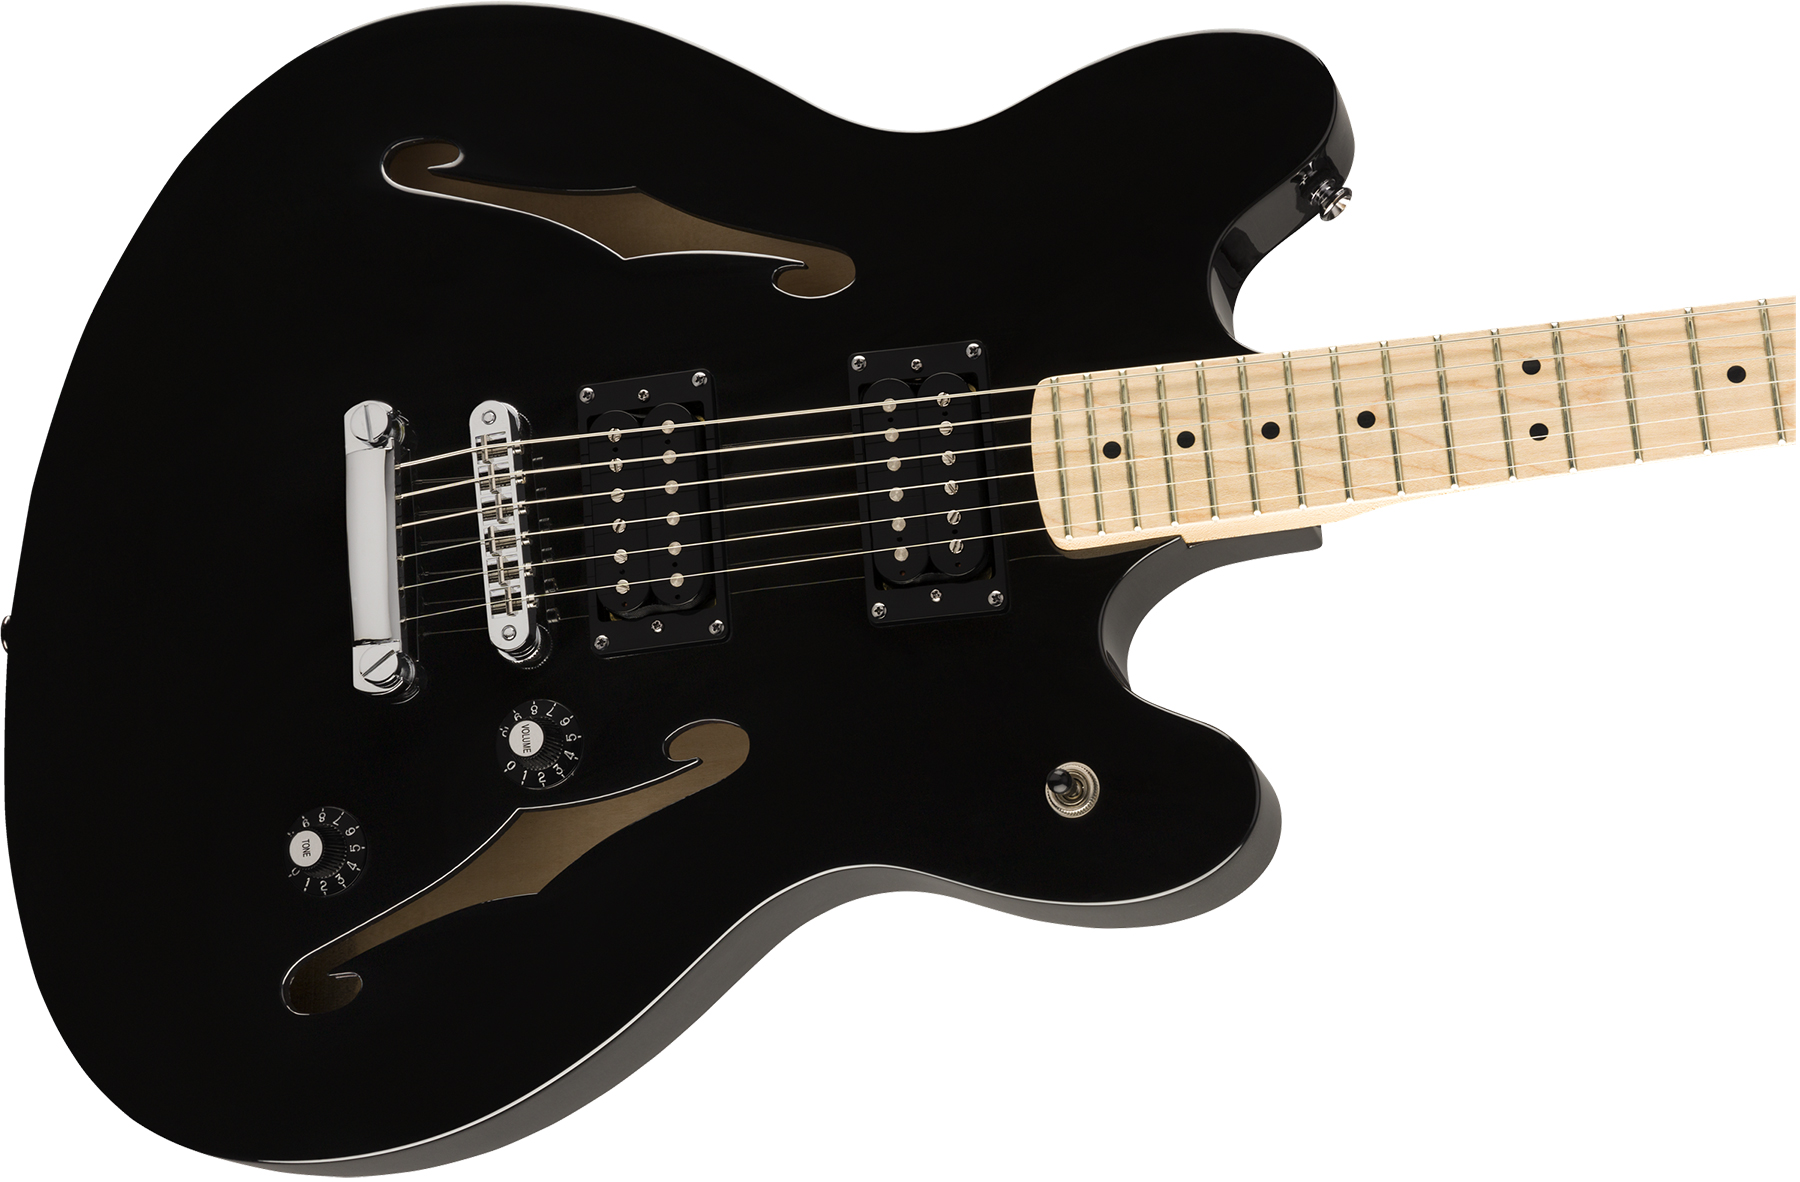 Squier Starcaster Affinity 2019 Hh Ht Mn - Black - Retro rock electric guitar - Variation 2